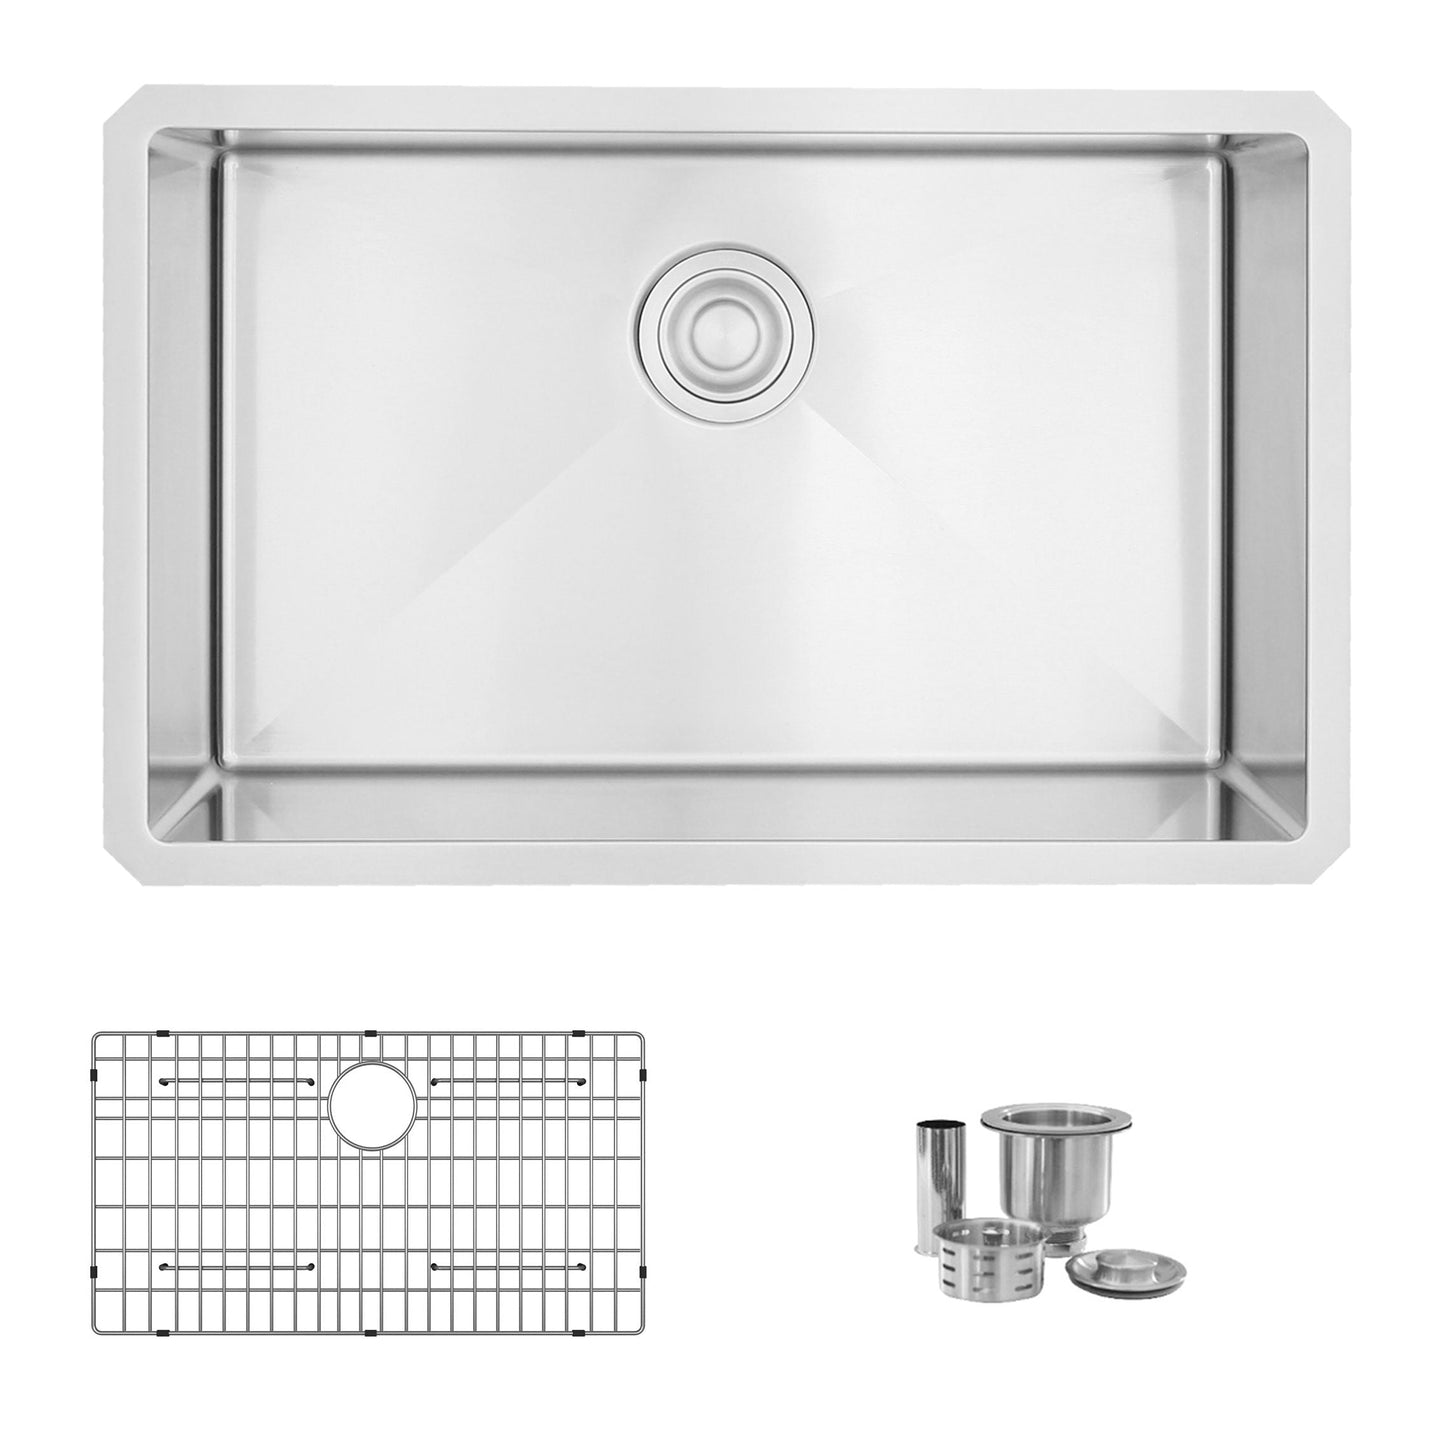 Stylish EMERALD 28" x 18" Single Bowl Kitchen Sink, 16 Gauge Stainless Steel with Grid and Basket Strainer, S-306XG